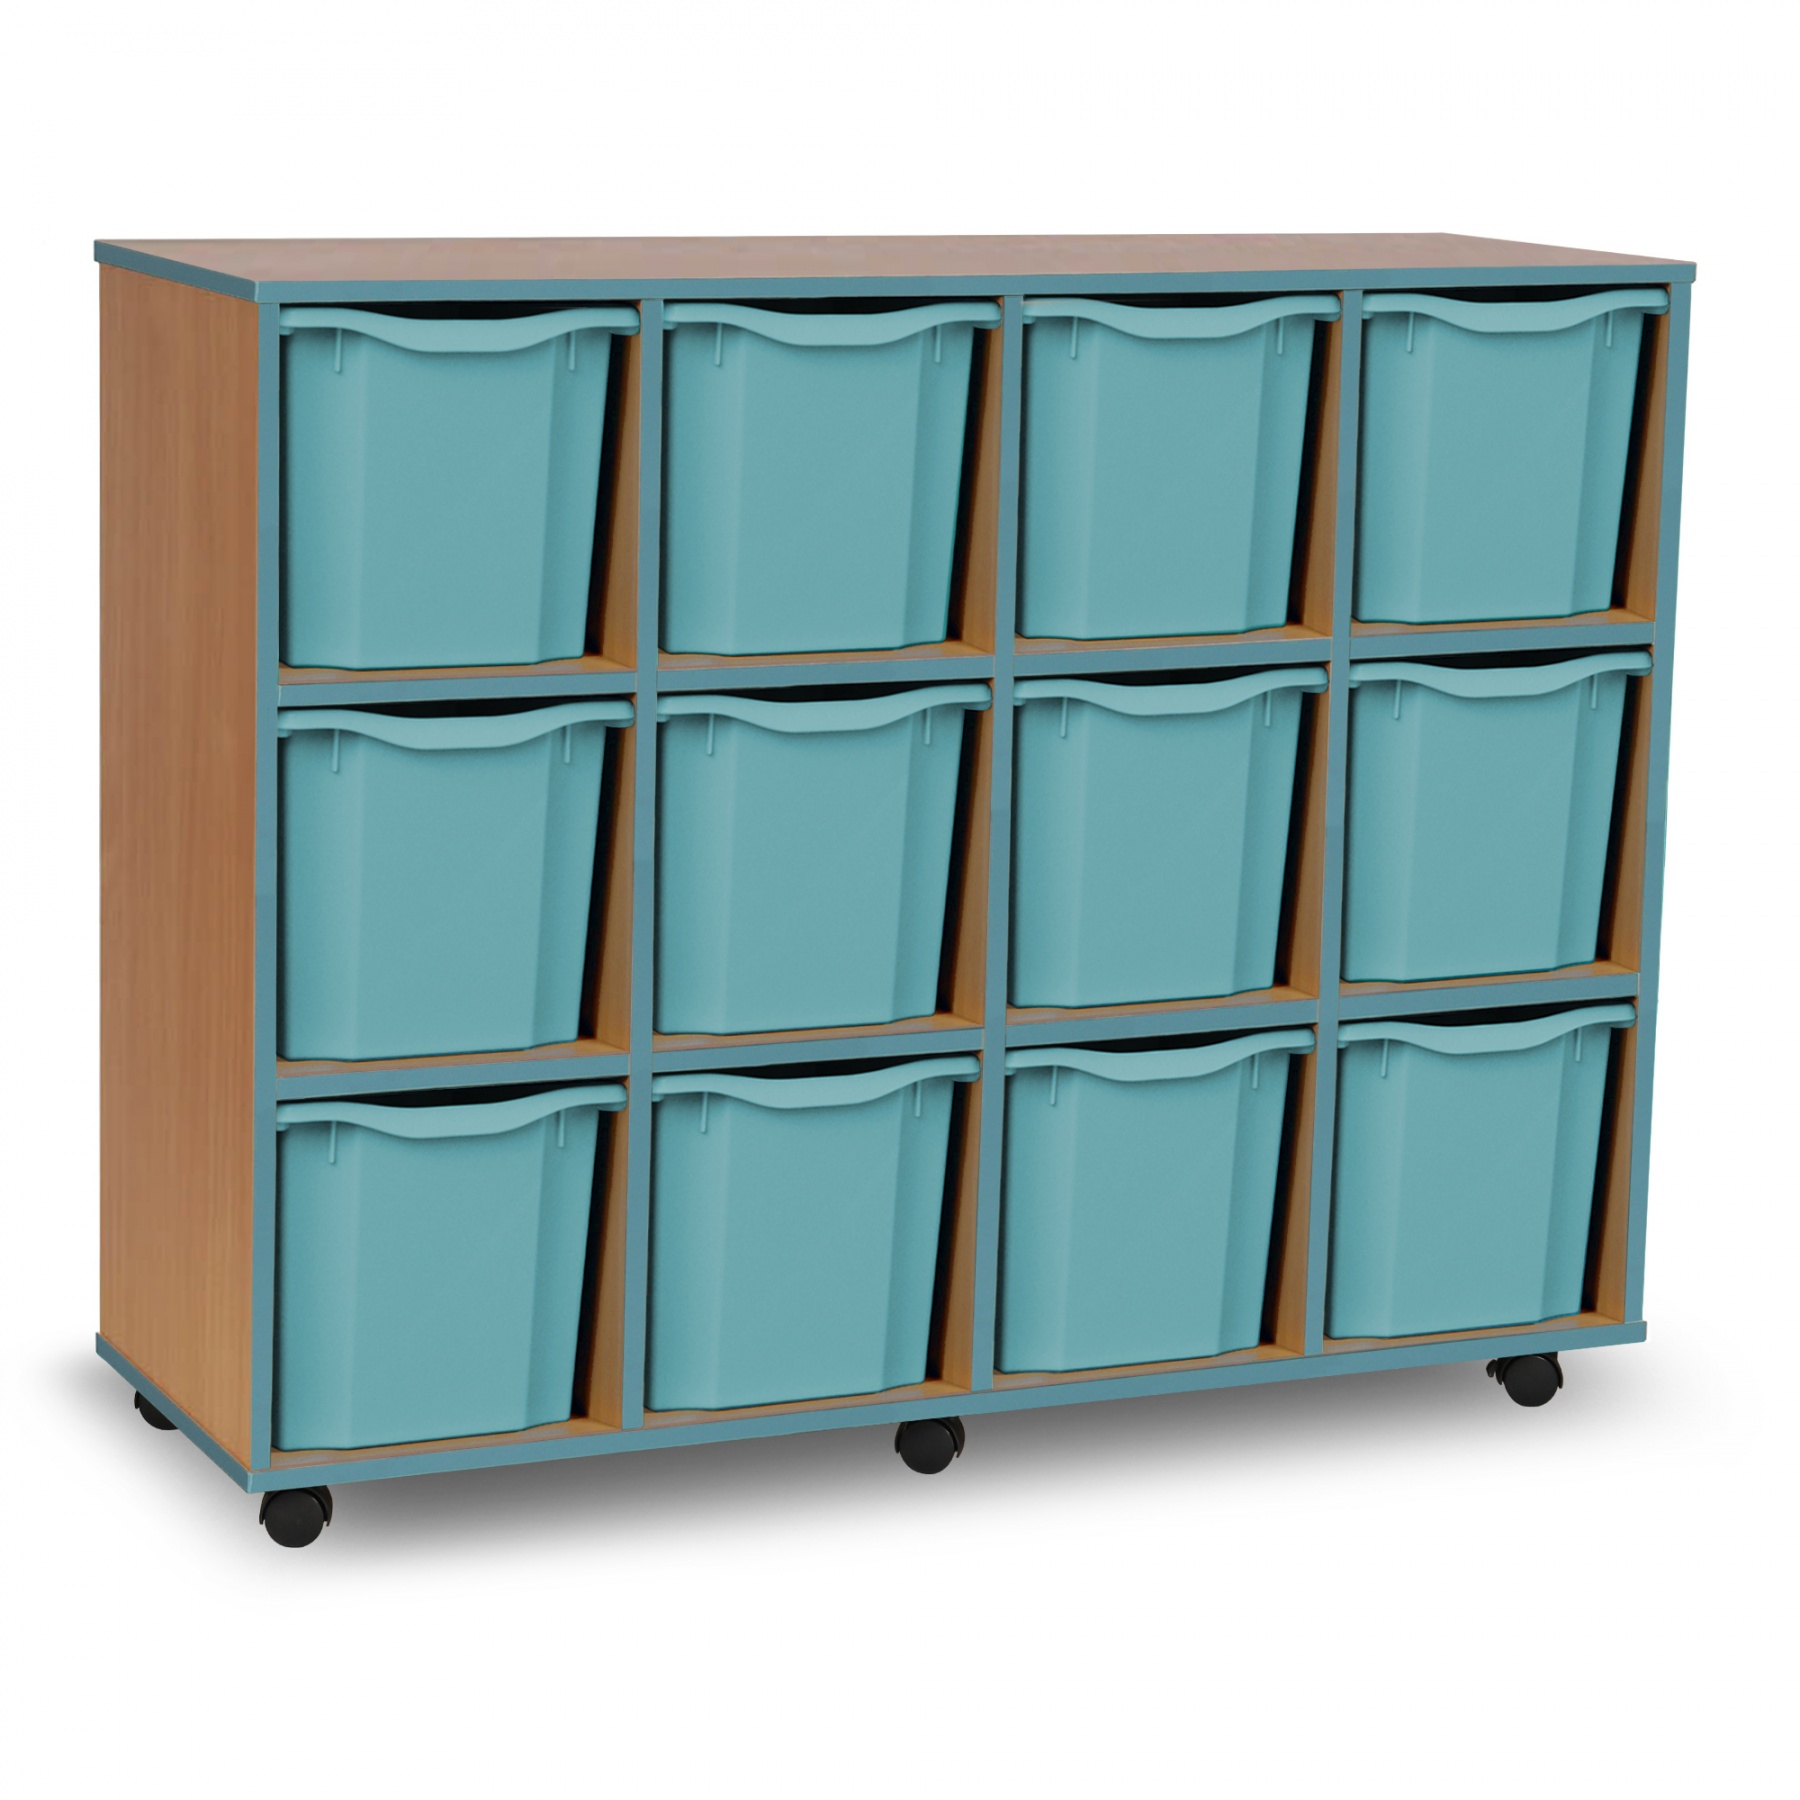 12 Quad Tray Unit Complete with Metal Blue Edging, Castors and Metal Blue Trays